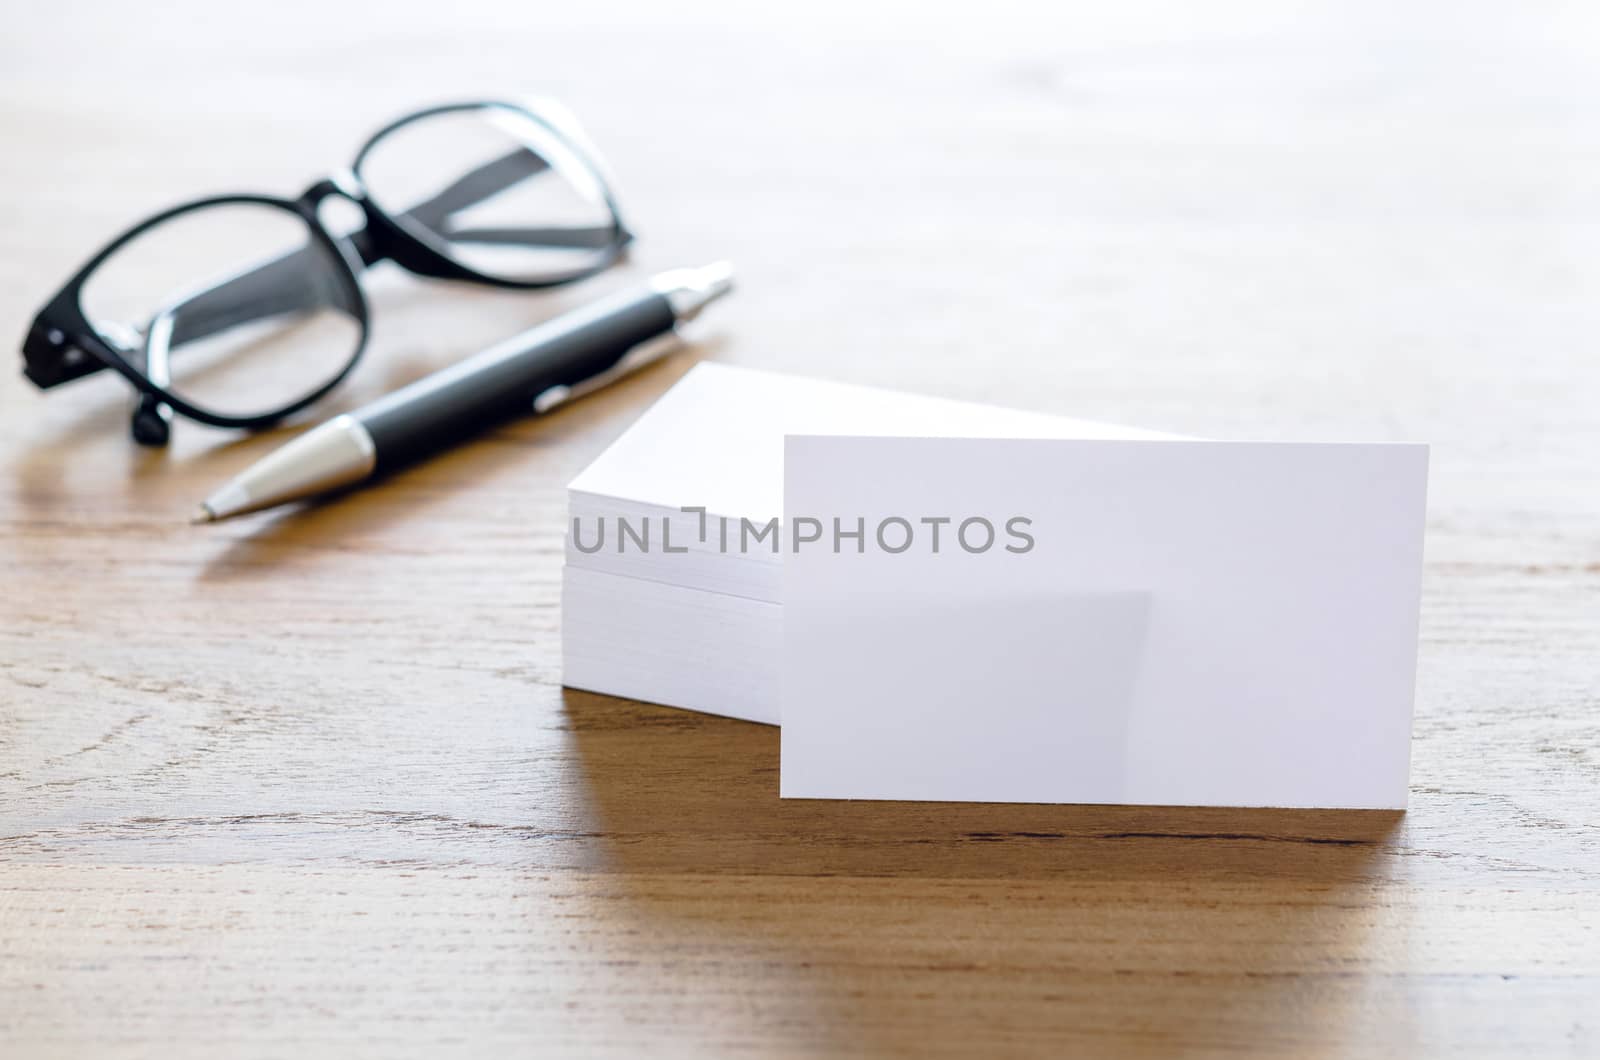 Blank business cards, pen and eyeglasses on wooden table.